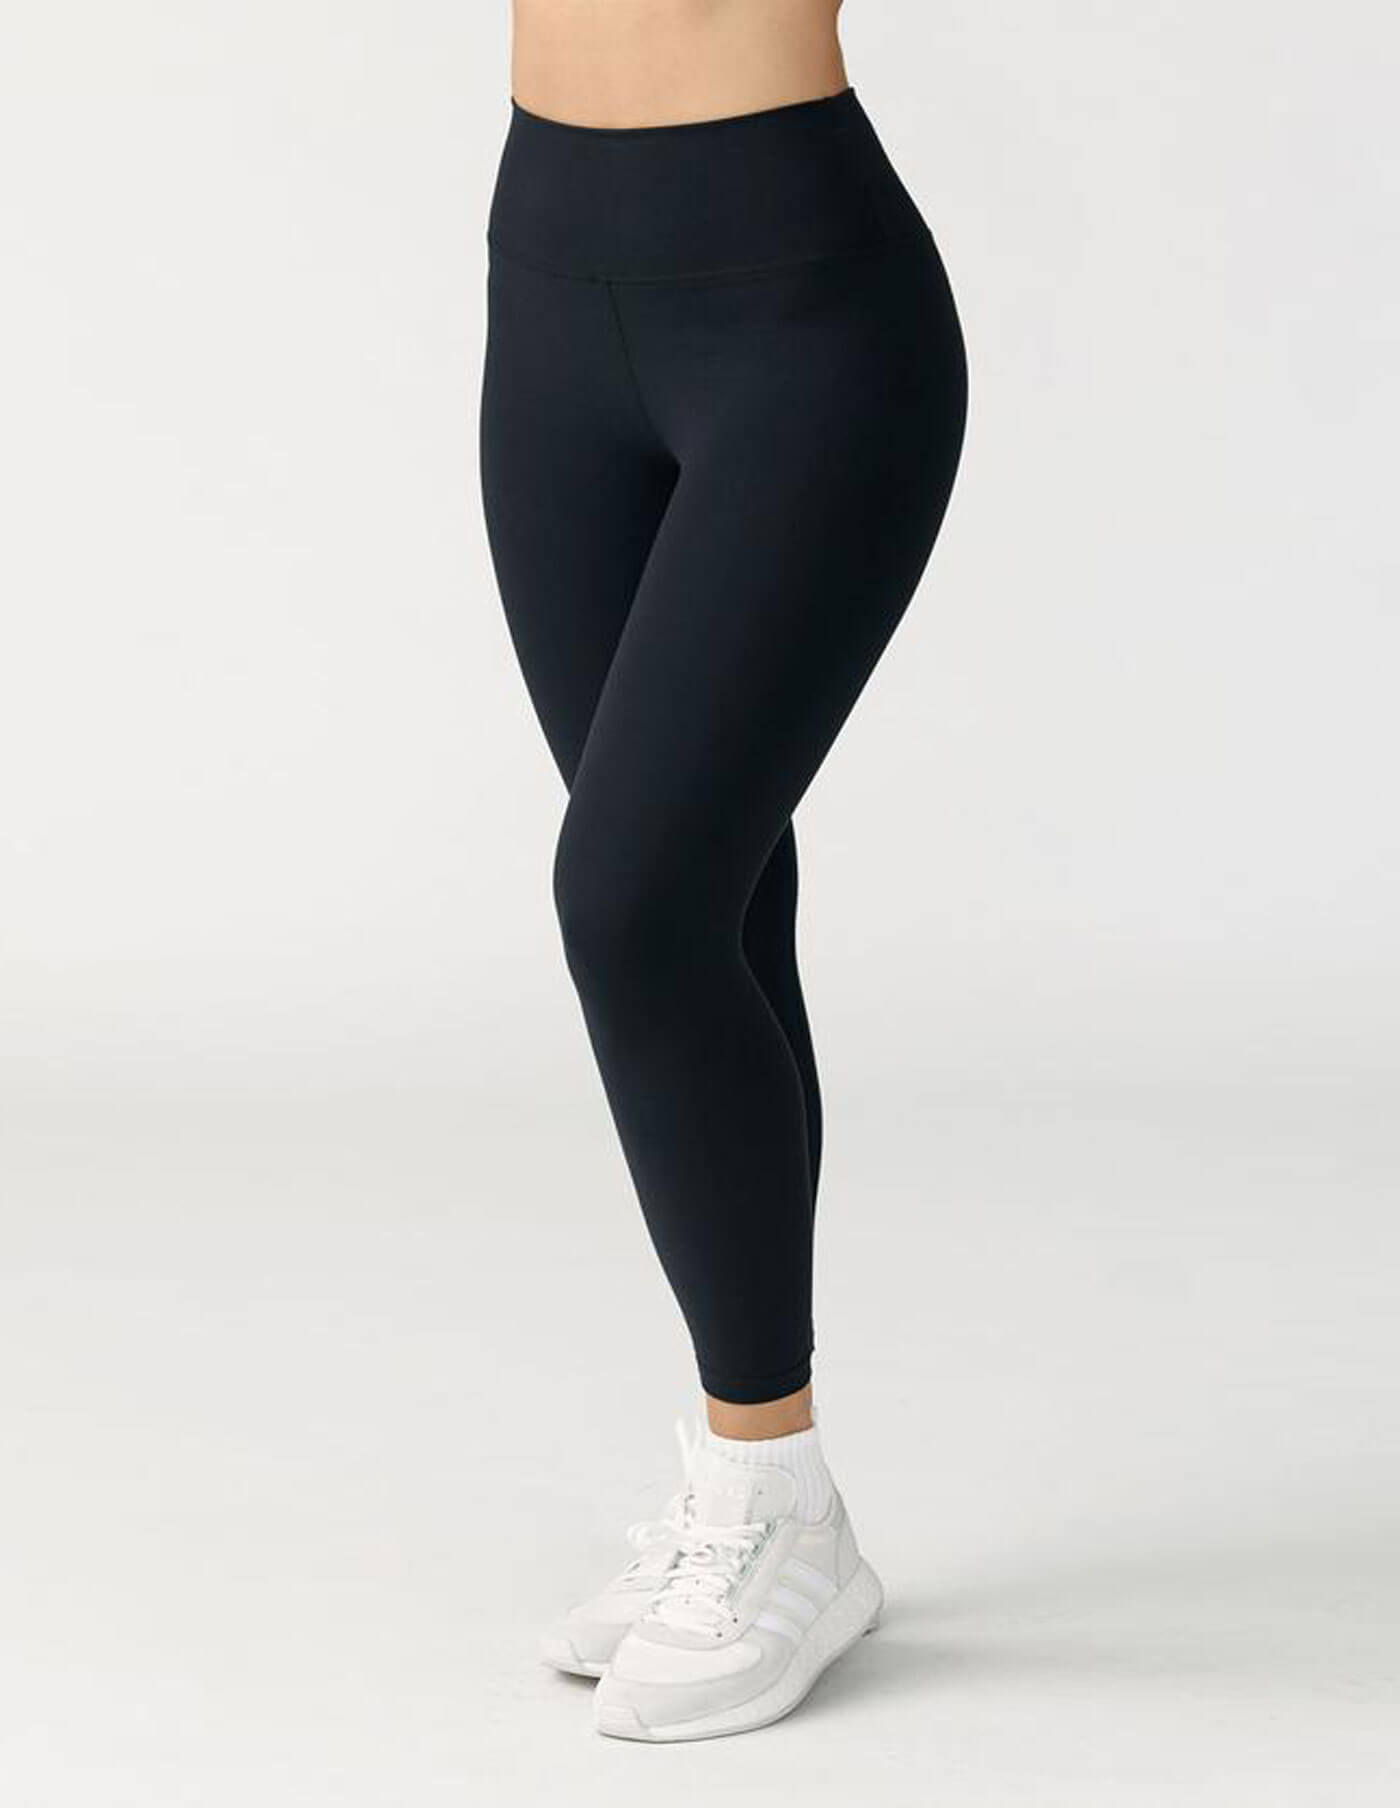 Joah Brown Leggings In Sueded Onyx at Storm Fashion